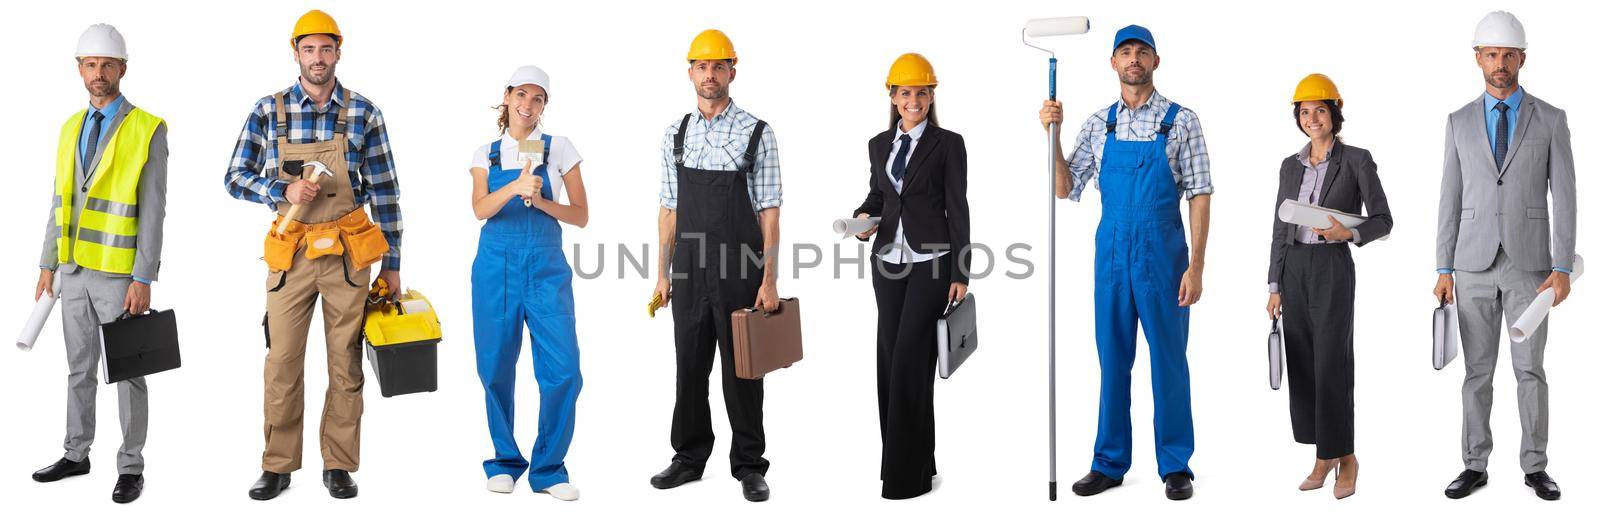 Construction industry workers on white by ALotOfPeople